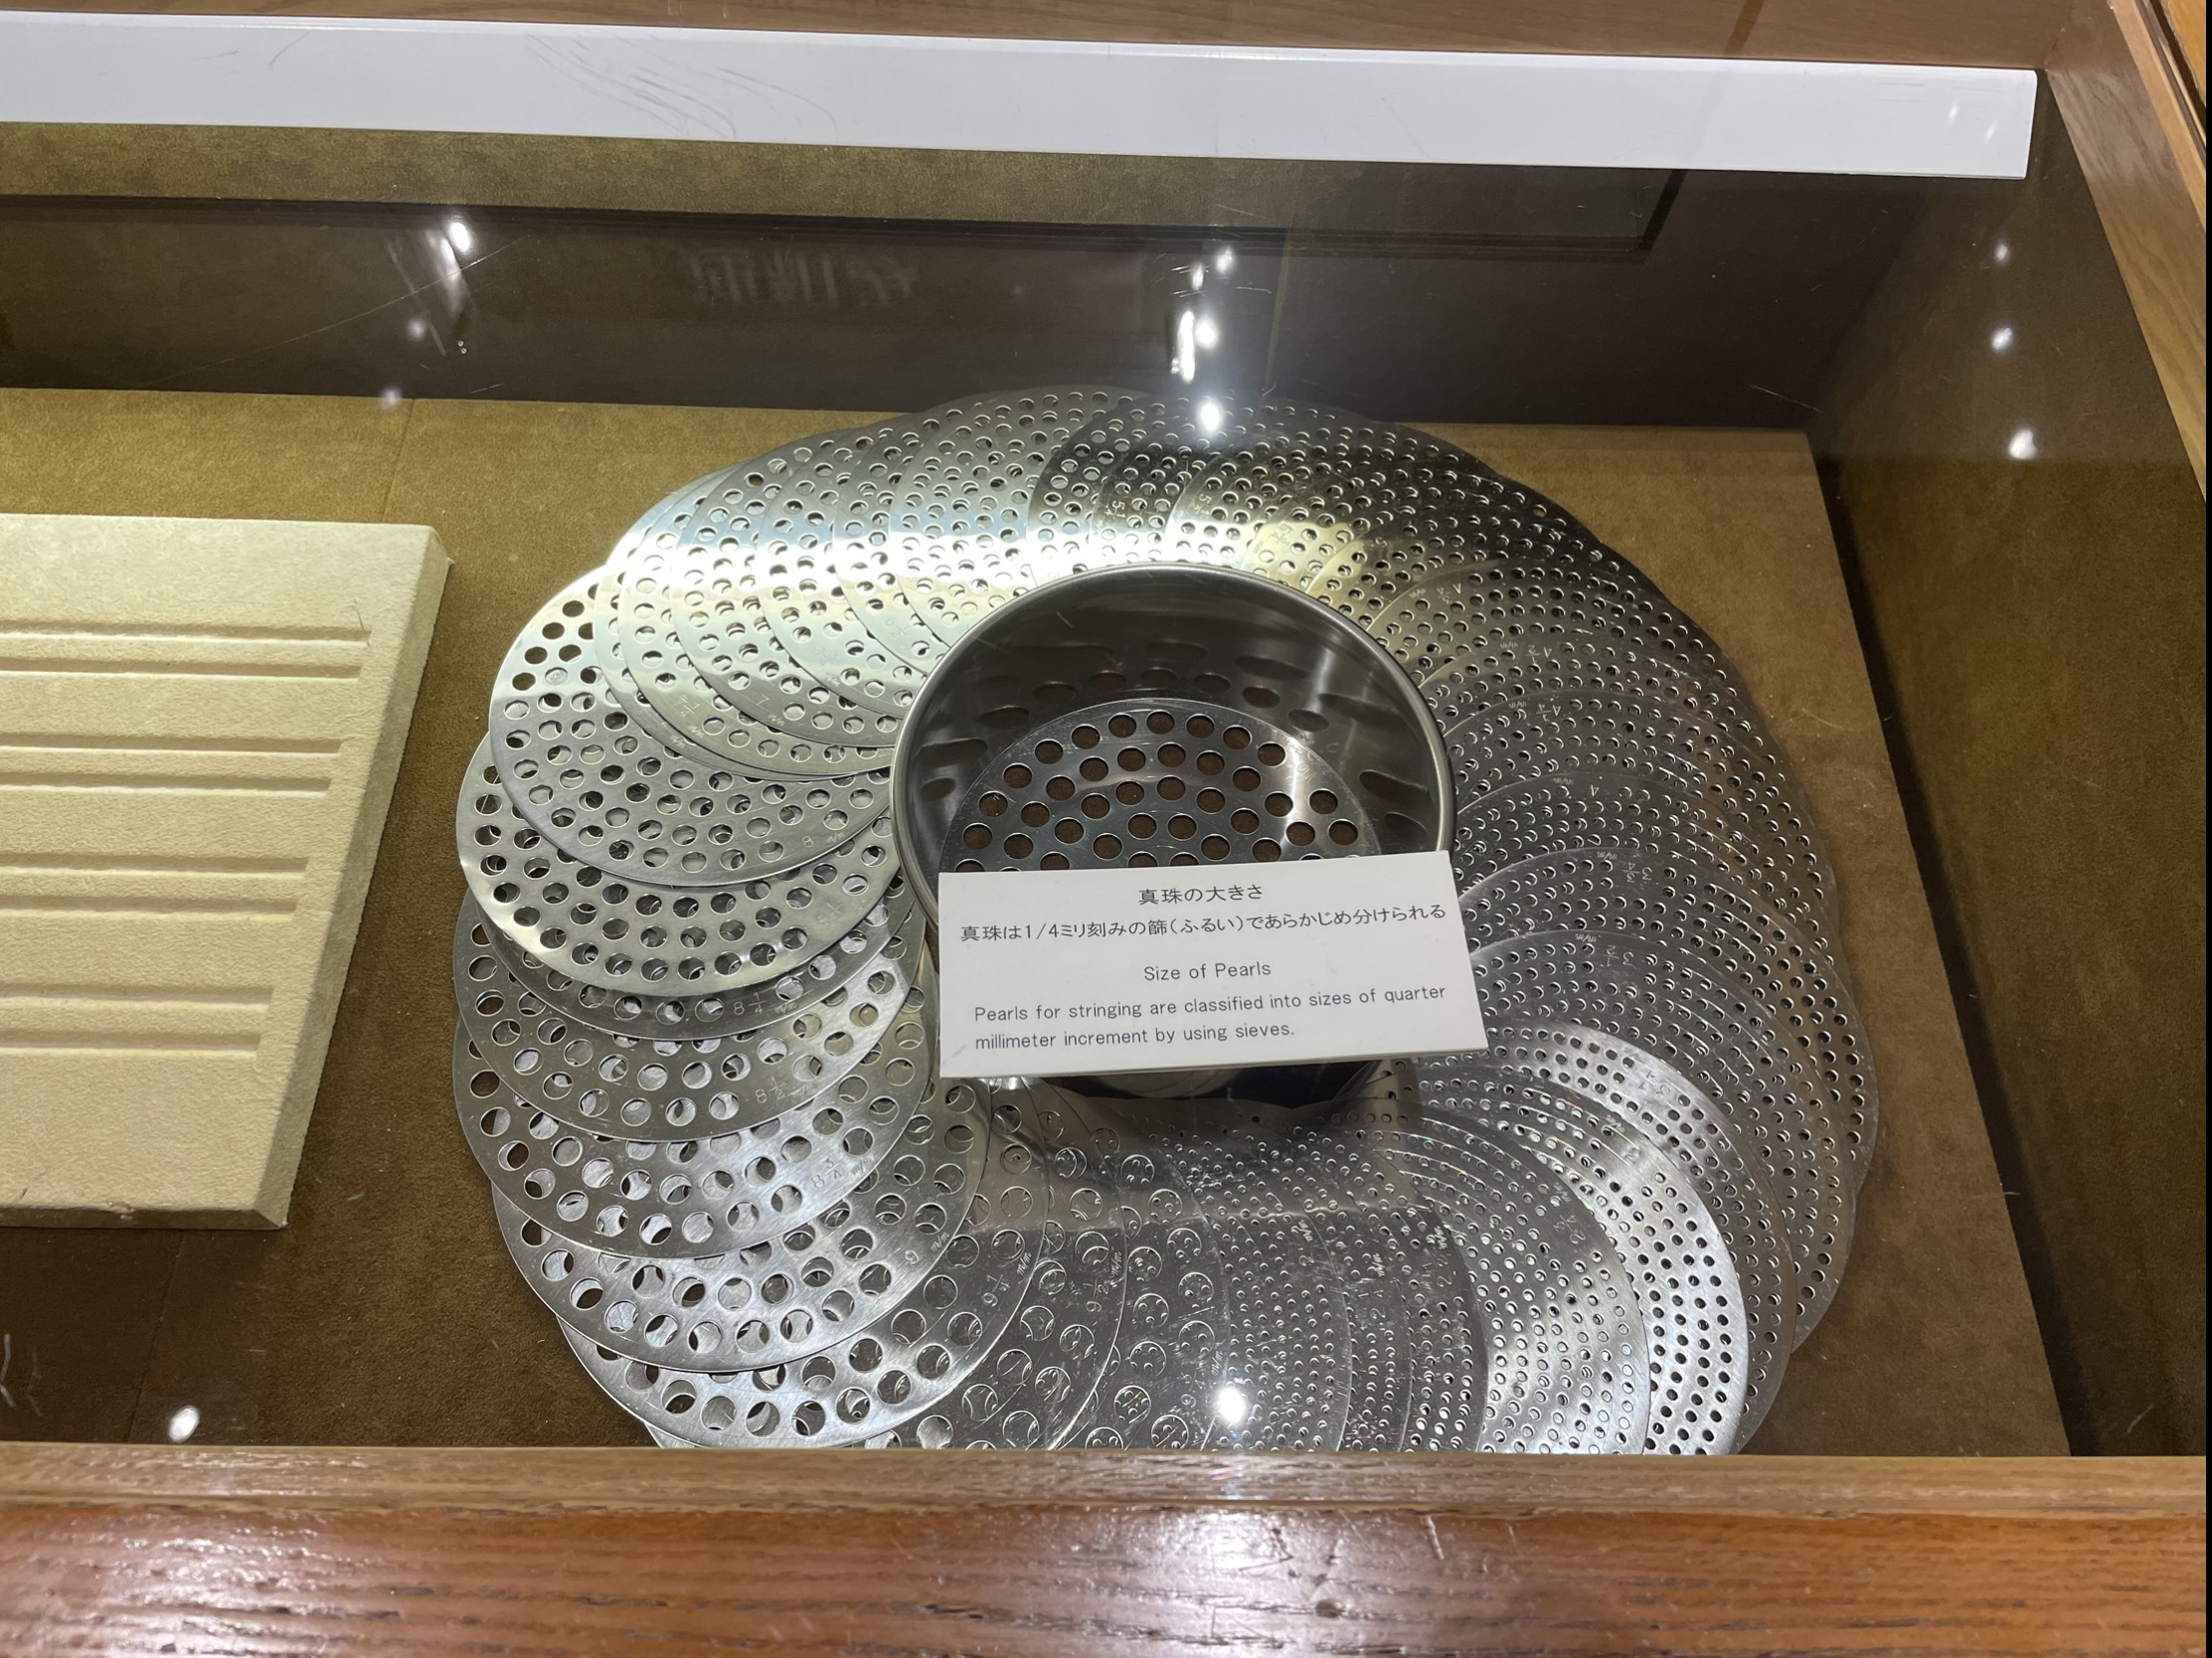 Device used to sort pearls by size - Mikimoto Pearl Museum